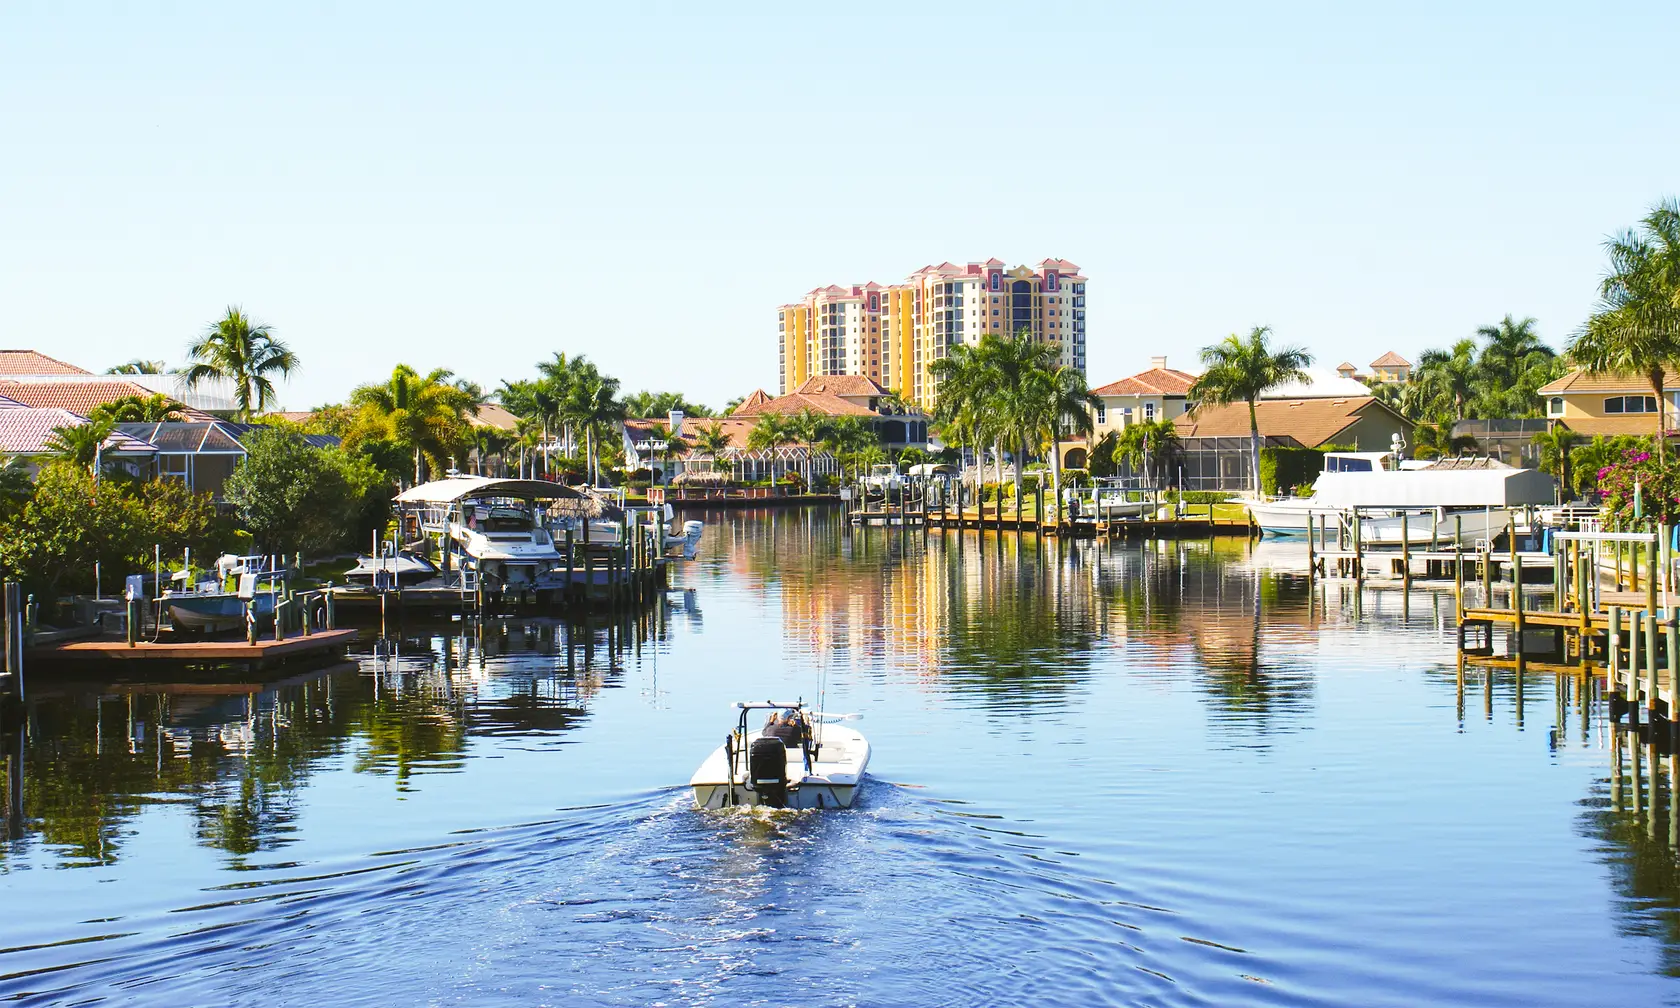 Things to do in Cape Coral